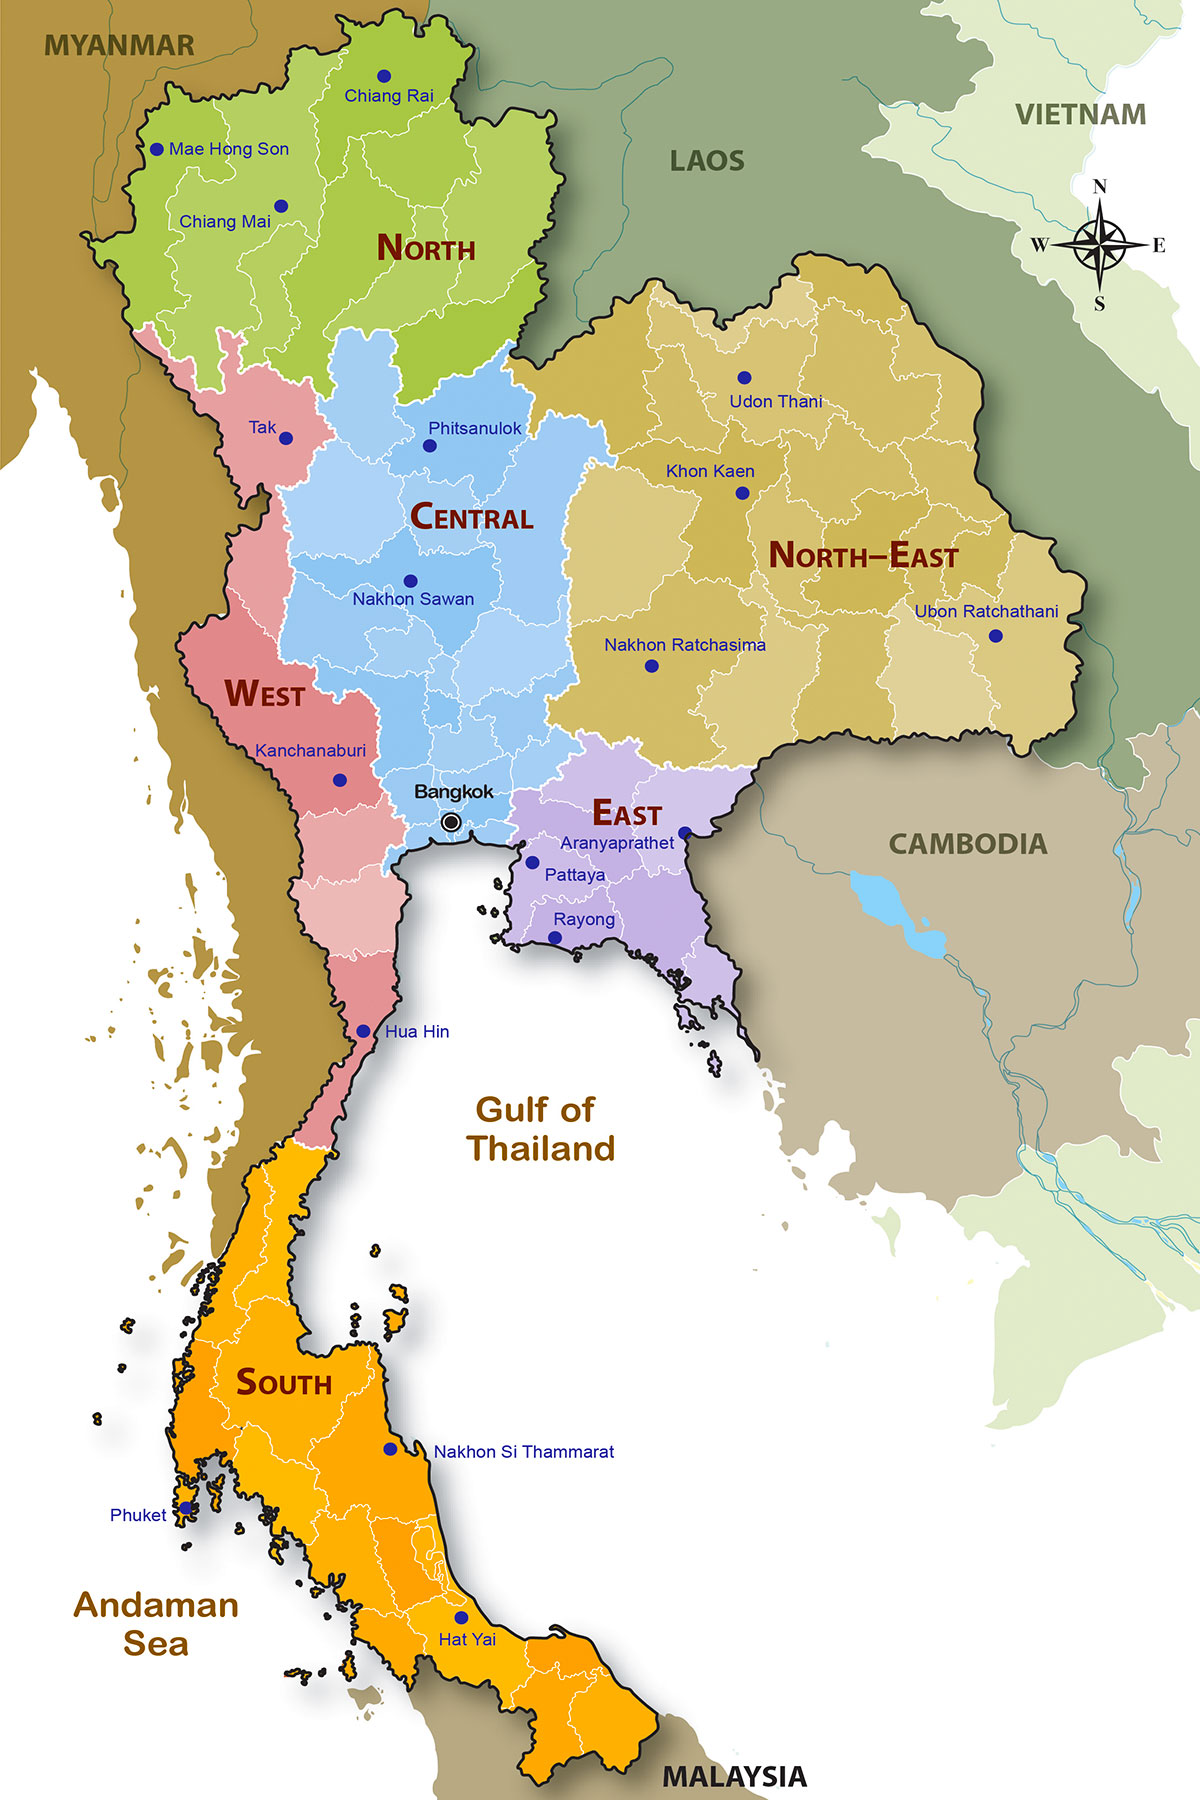  Political and Regional Geography of Thailand - Dr Steven Andrew Martin - Six Regions of Thailand